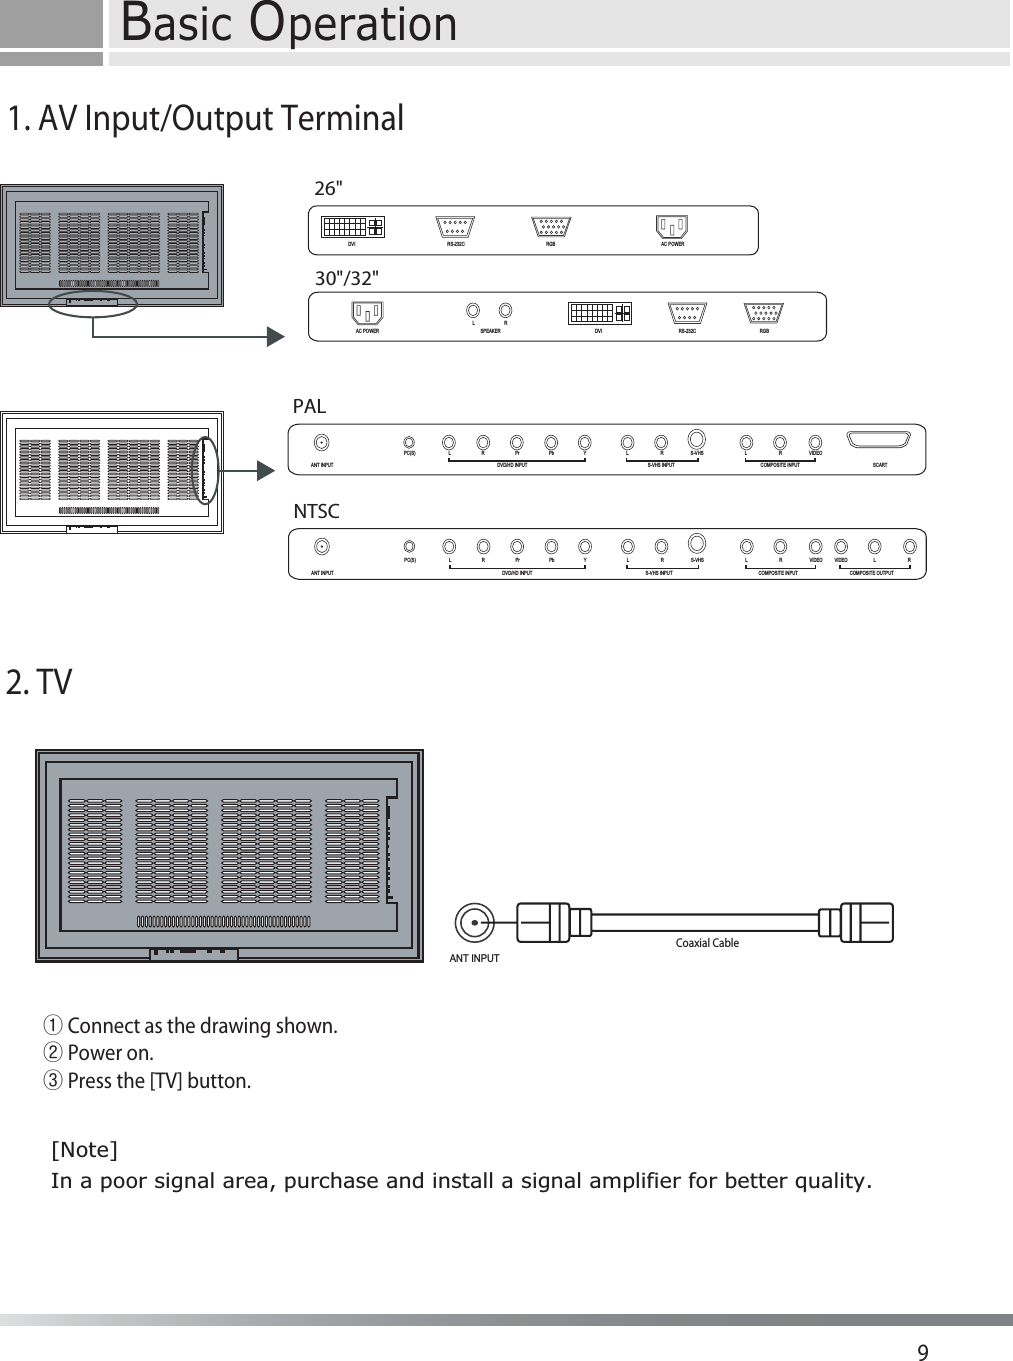 Basic Operation926&quot;30&quot;/32&quot;PALNTSC2. TVCoaxial CableANT INPUTྙConnect as the drawing shown.ྚPower on.ྛPress the [TV] button.DVI RS-232C RGB AC POWERLRAC POWER SPEAKER DVI RS-232C RGBANT INPUT DVD/HD INPUT S-VHS INPUT COMPOSITE INPUT SCARTPC(S) L R Pr Pb Y L R S-VHS L R VIDEOANT INPUT DVD/HD INPUT S-VHS INPUT COMPOSITE INPUT COMPOSITE OUTPUTPC(S) L R Pr Pb Y L R S-VHS L R VIDEO VIDEO L R1. AV Input/Output Terminal[Note]In a poor signal area, purchase and install a signal amplifier for better quality.